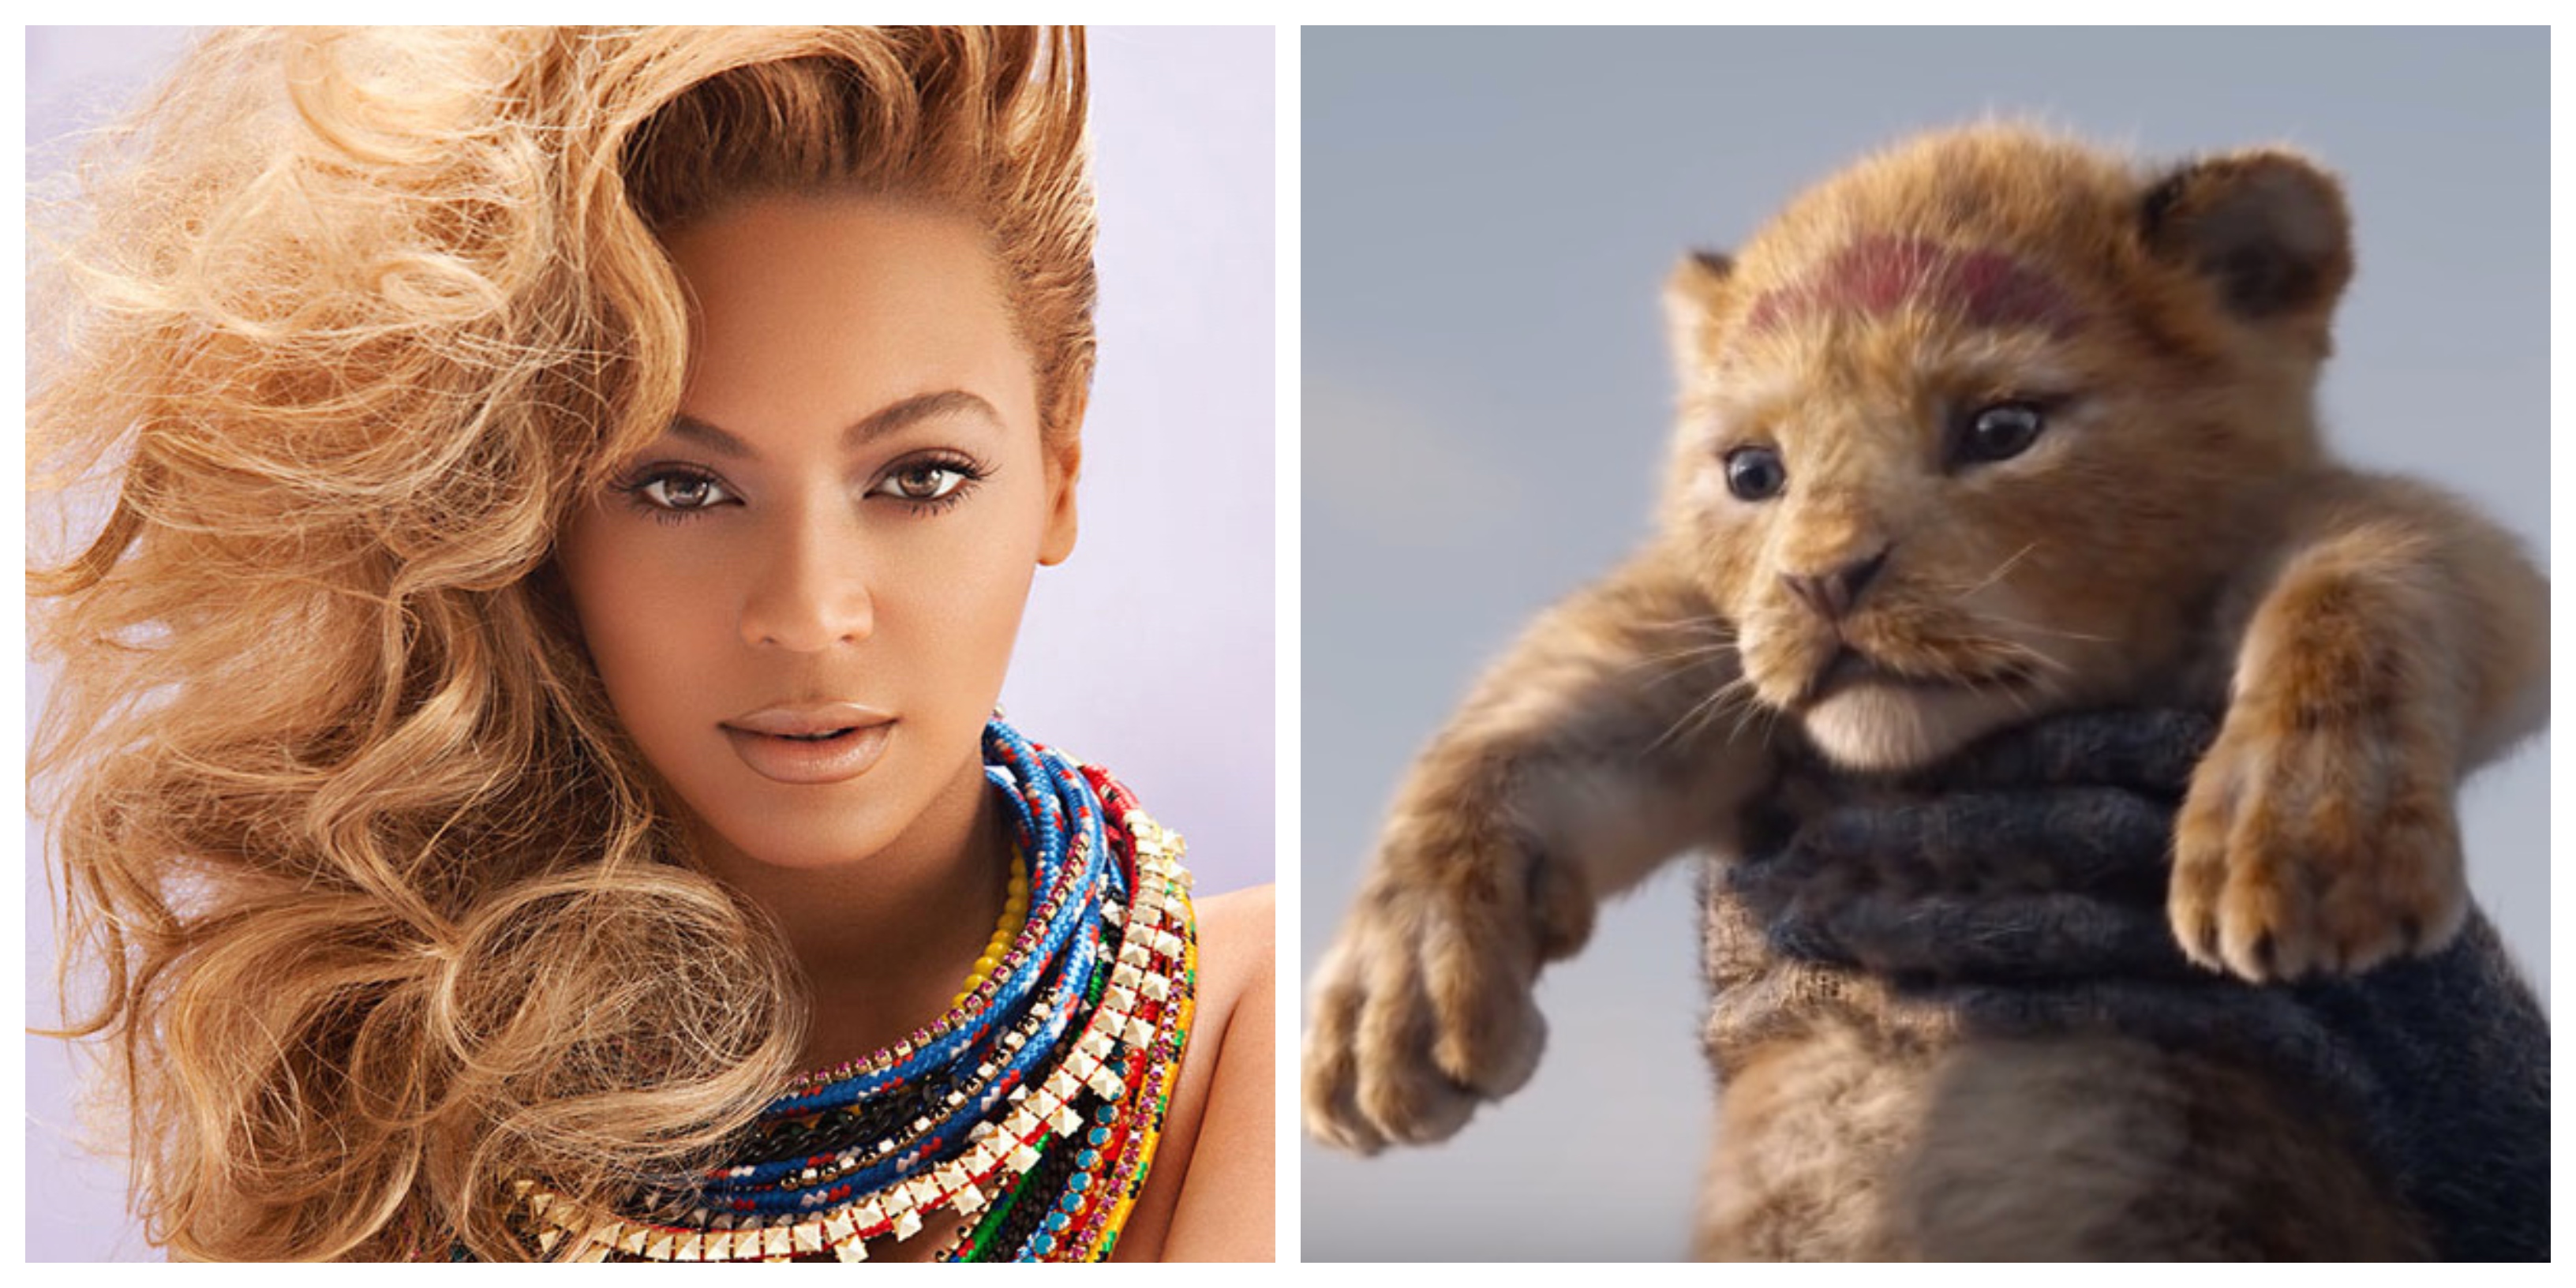 'The Lion King' [Starring Beyonce & Donald Glover] Shatters Disney Trailer Record With ...3264 x 1632